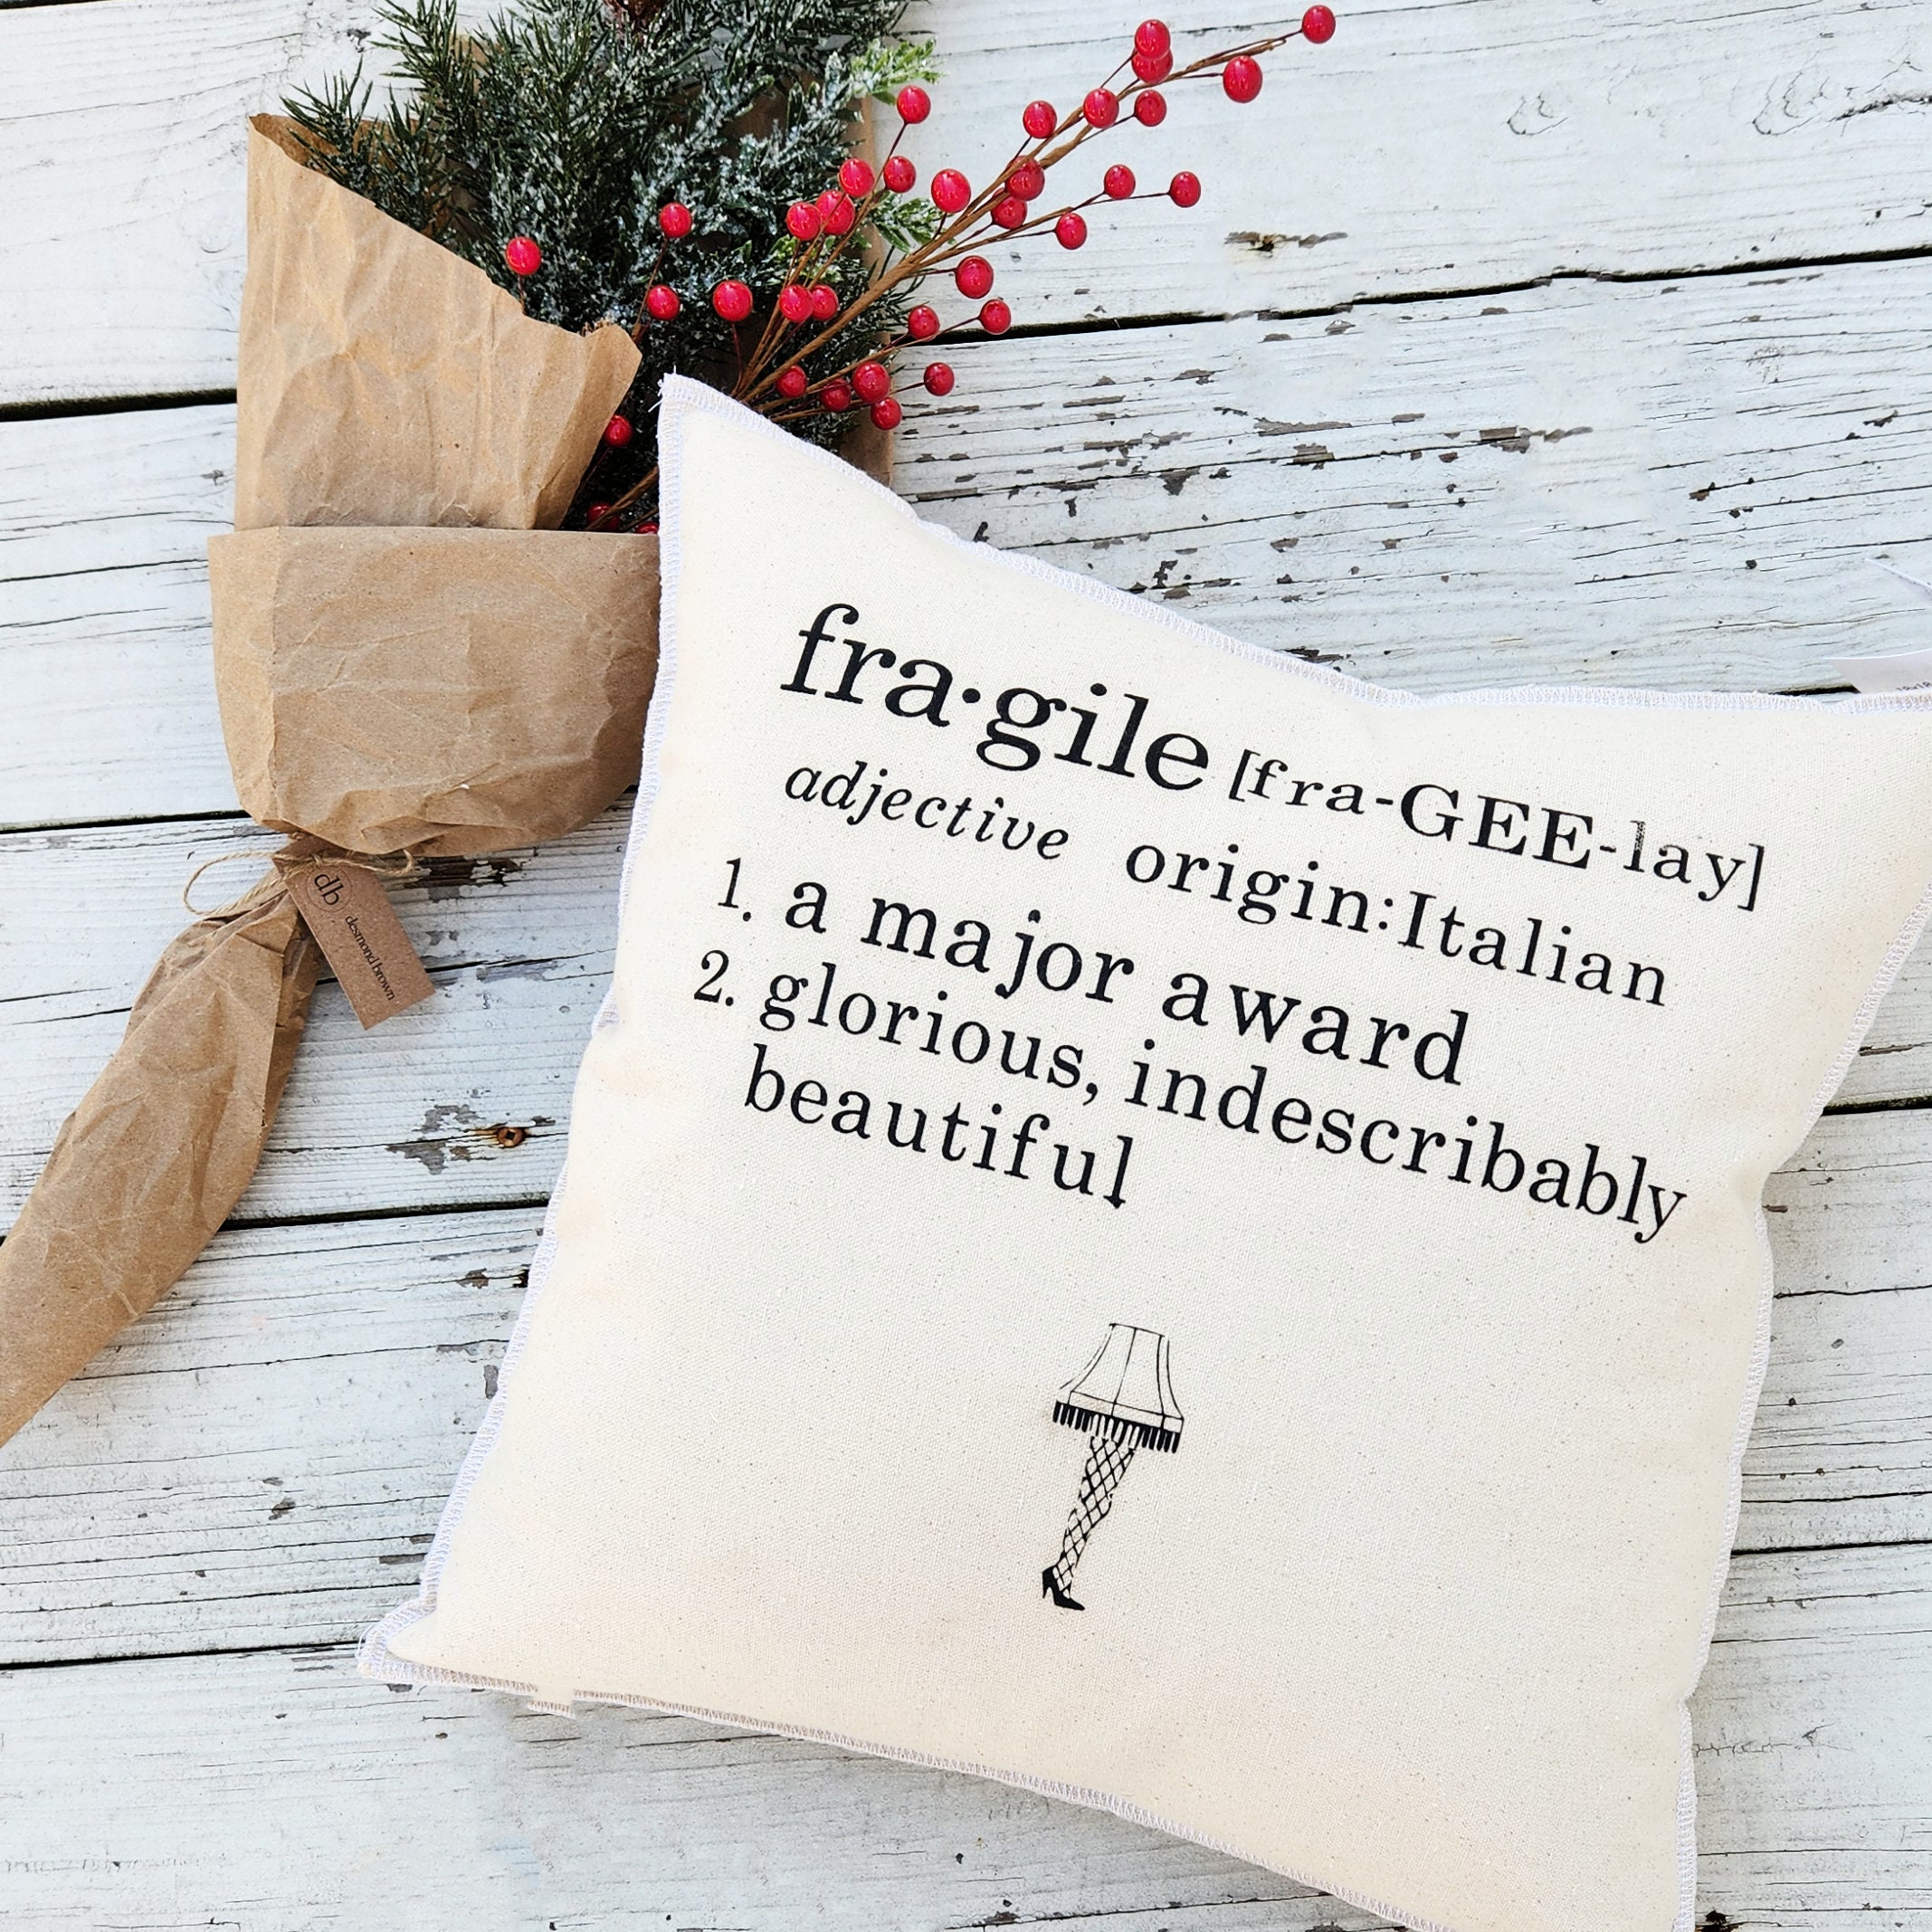 Oh Susannah Christmas Story Throw Pillow Cover Set (Two 18 by 18 inch Pillow Cover) A Christmas Story Decorations Gifts